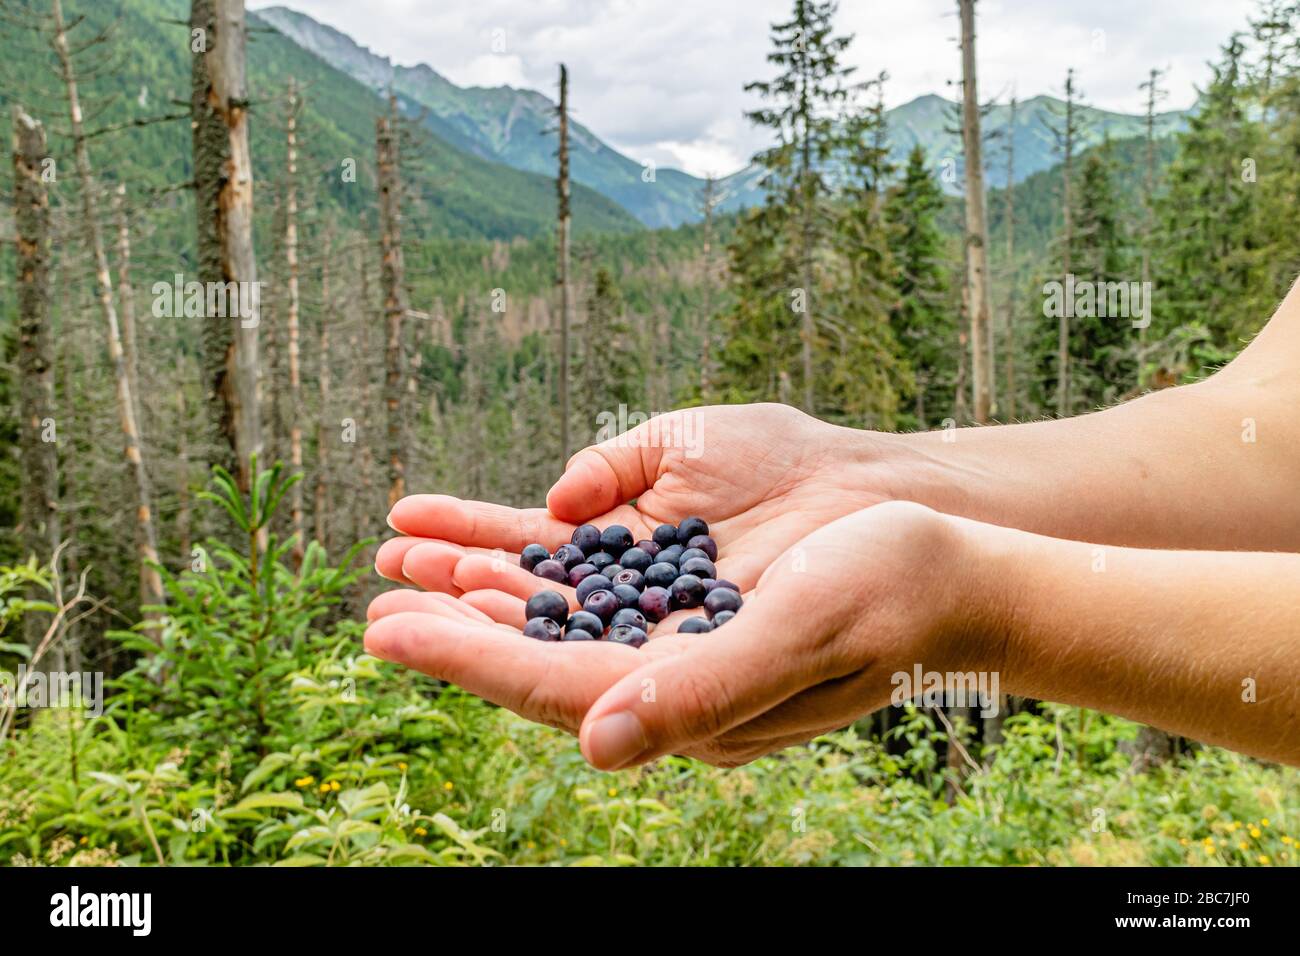 Wild blueberries collected by a hiker in the Tatra Mountain National Park, near Zakopane, Poland. July 2017. Stock Photo